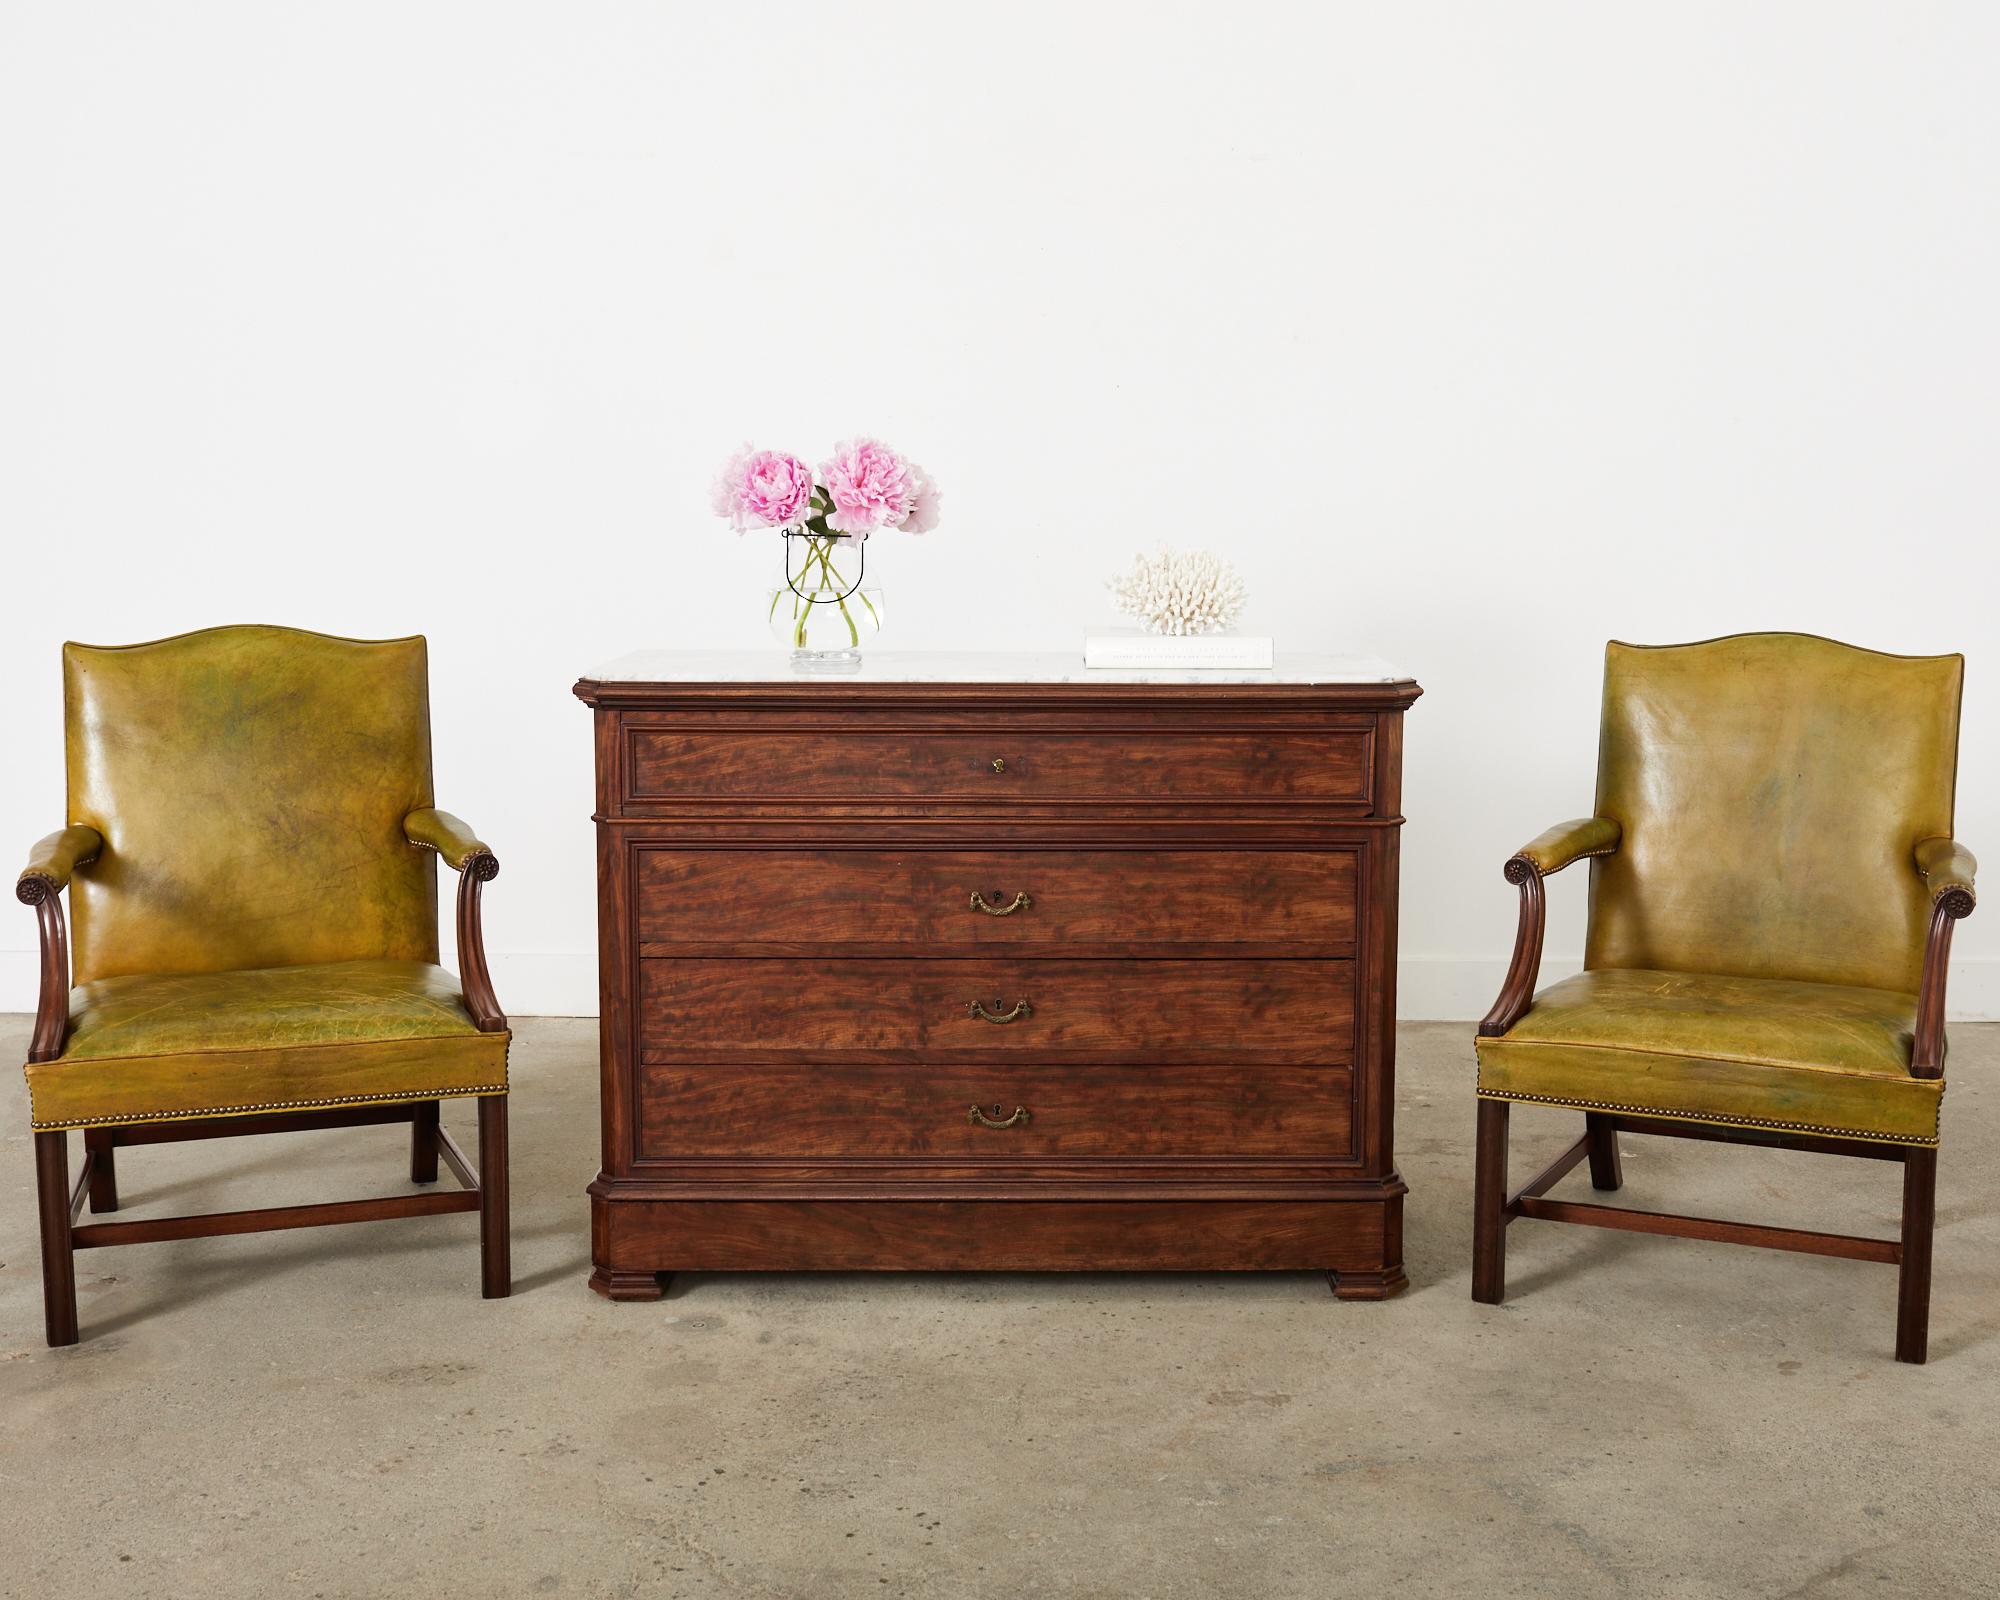 Extraordinary pair of 19th century English Georgian style mahogany Gainsborough library armchairs. The chairs feature full sized mahogany frames having a classic flat back with a serpentine crest and peaked corners. The generous seat has wide padded